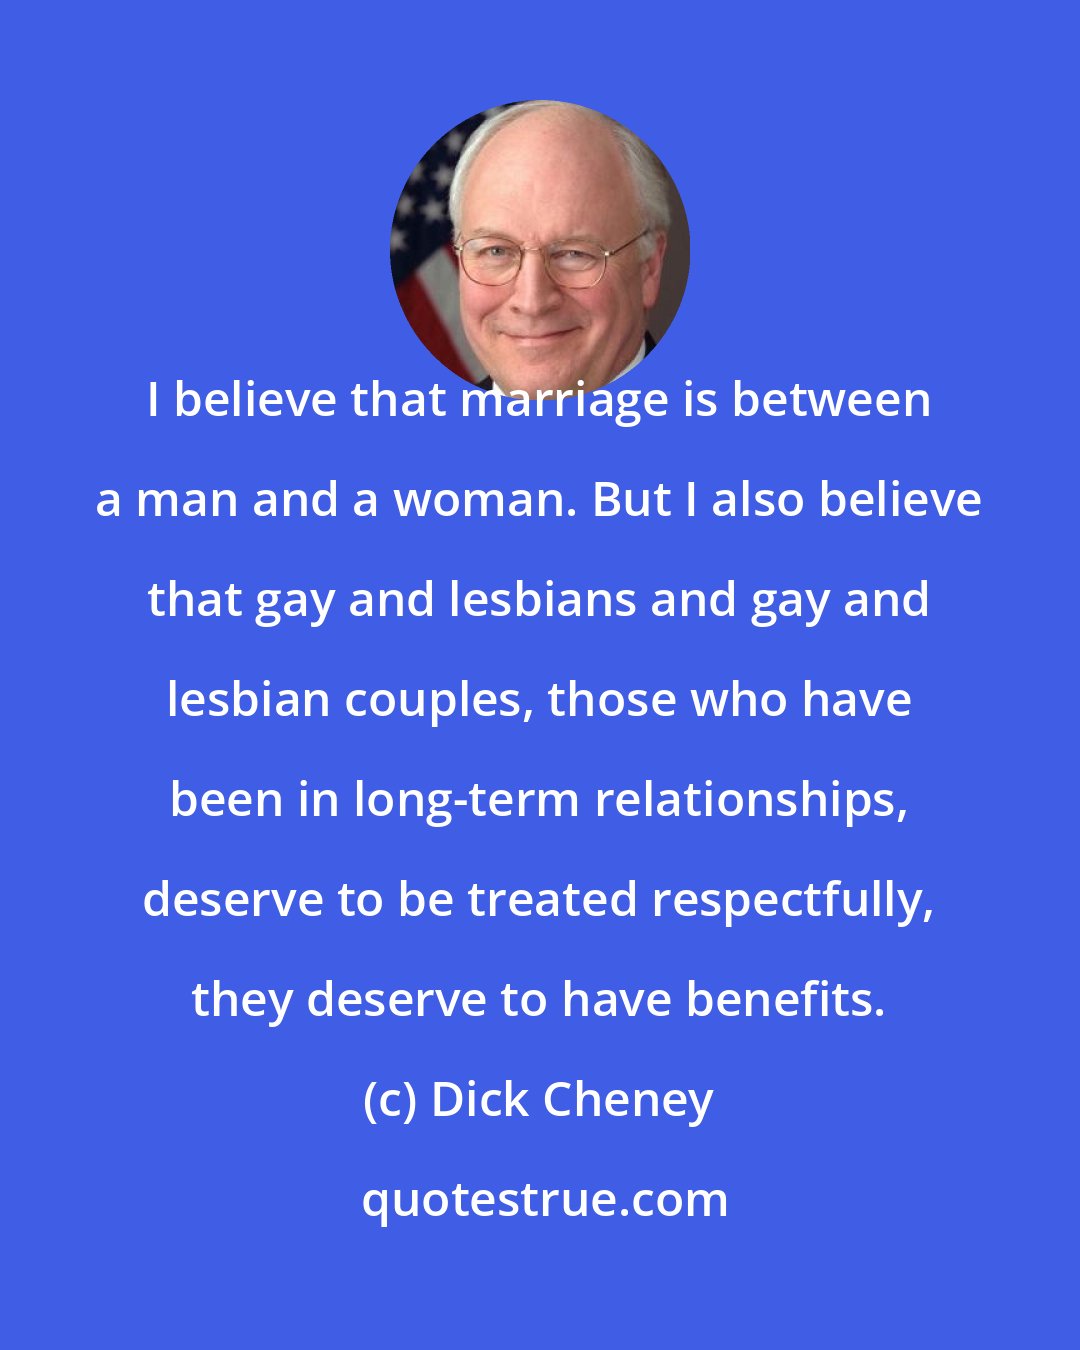 Dick Cheney: I believe that marriage is between a man and a woman. But I also believe that gay and lesbians and gay and lesbian couples, those who have been in long-term relationships, deserve to be treated respectfully, they deserve to have benefits.